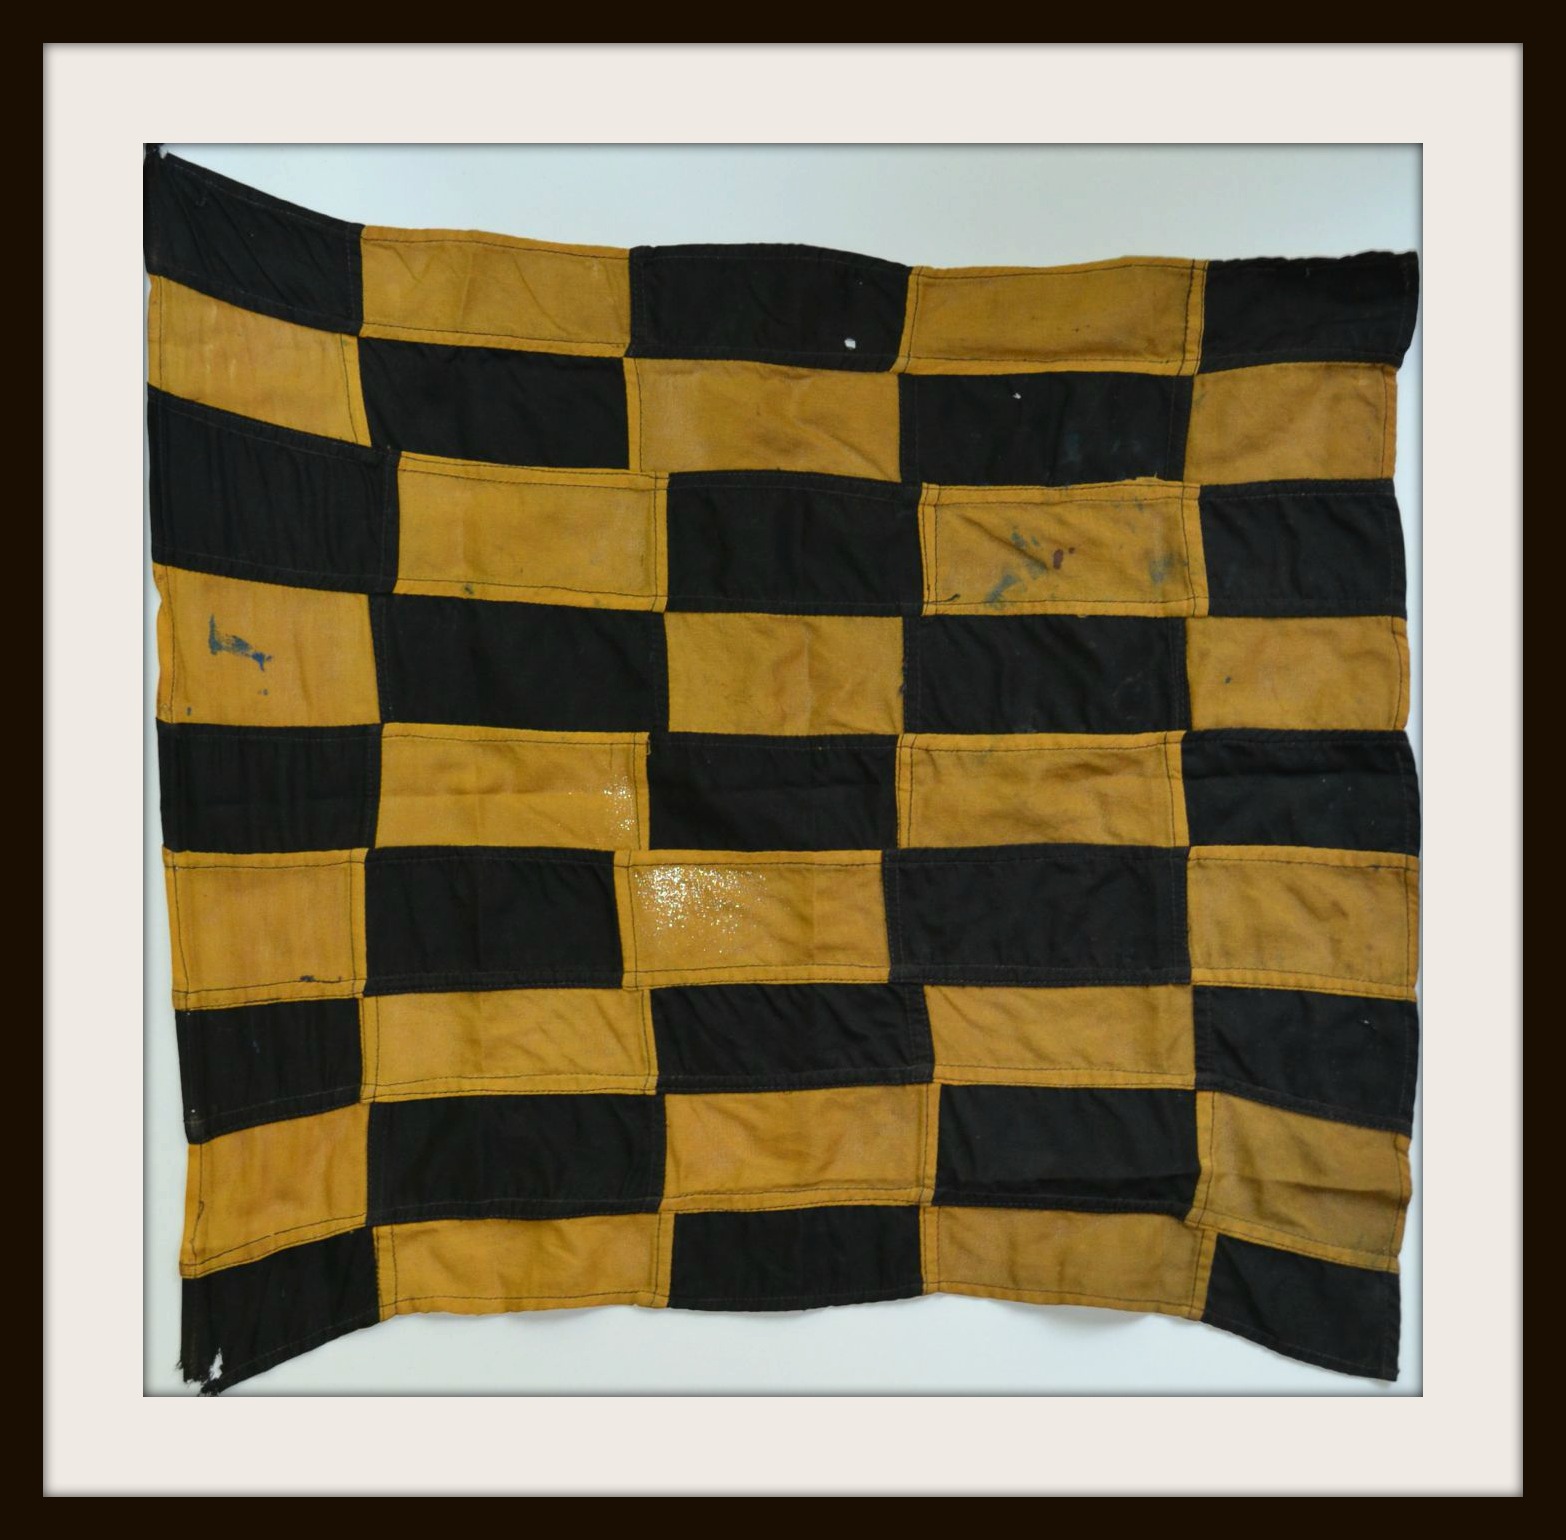 WWII SIGNAL FLAG IMAGE